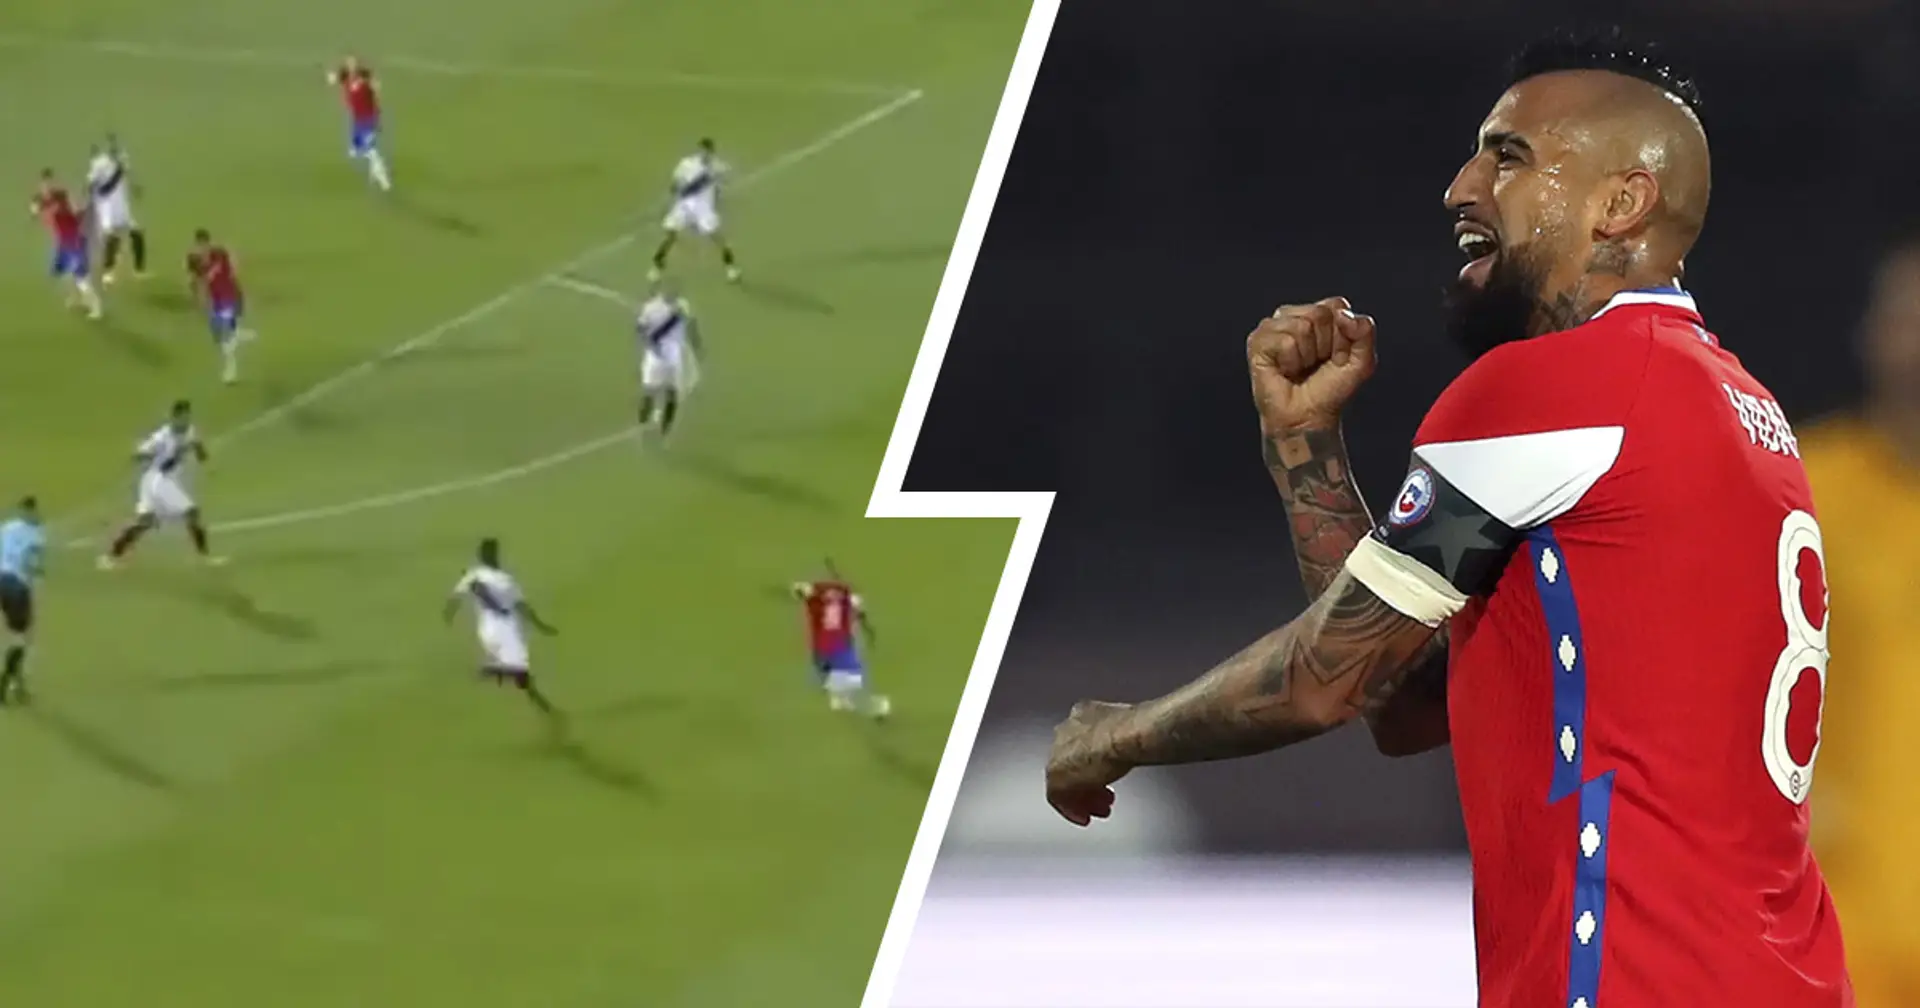 We miss you Arturo! Vidal fires rocket for Chile in World Cup qualifiers, adds another goal 15 mins later (video)